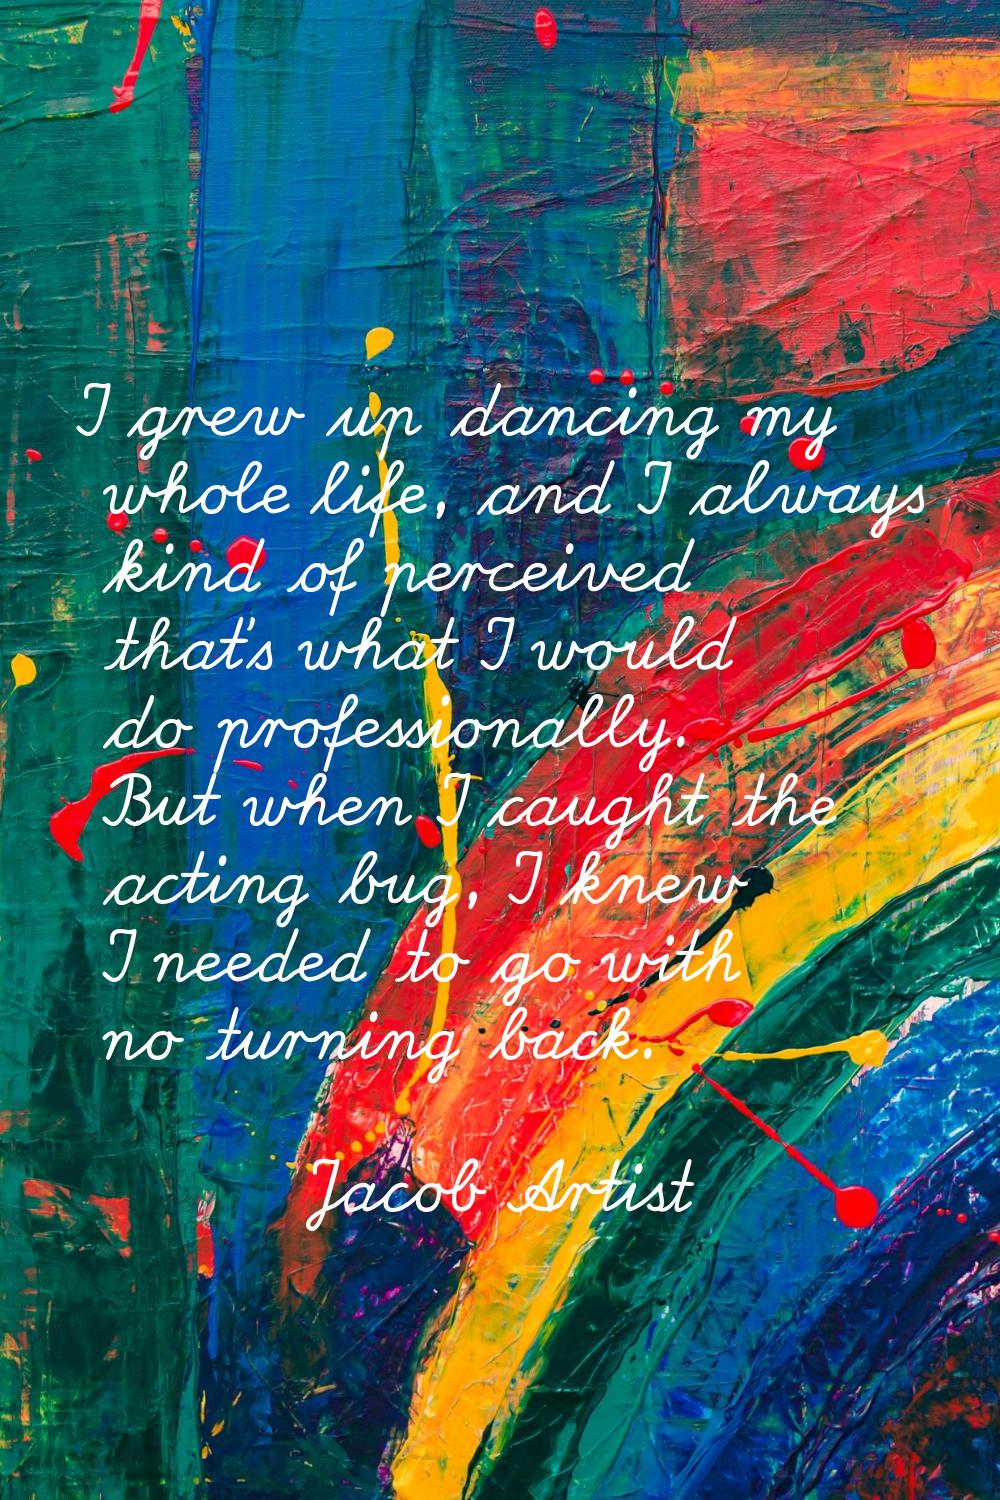 I grew up dancing my whole life, and I always kind of perceived that's what I would do professional